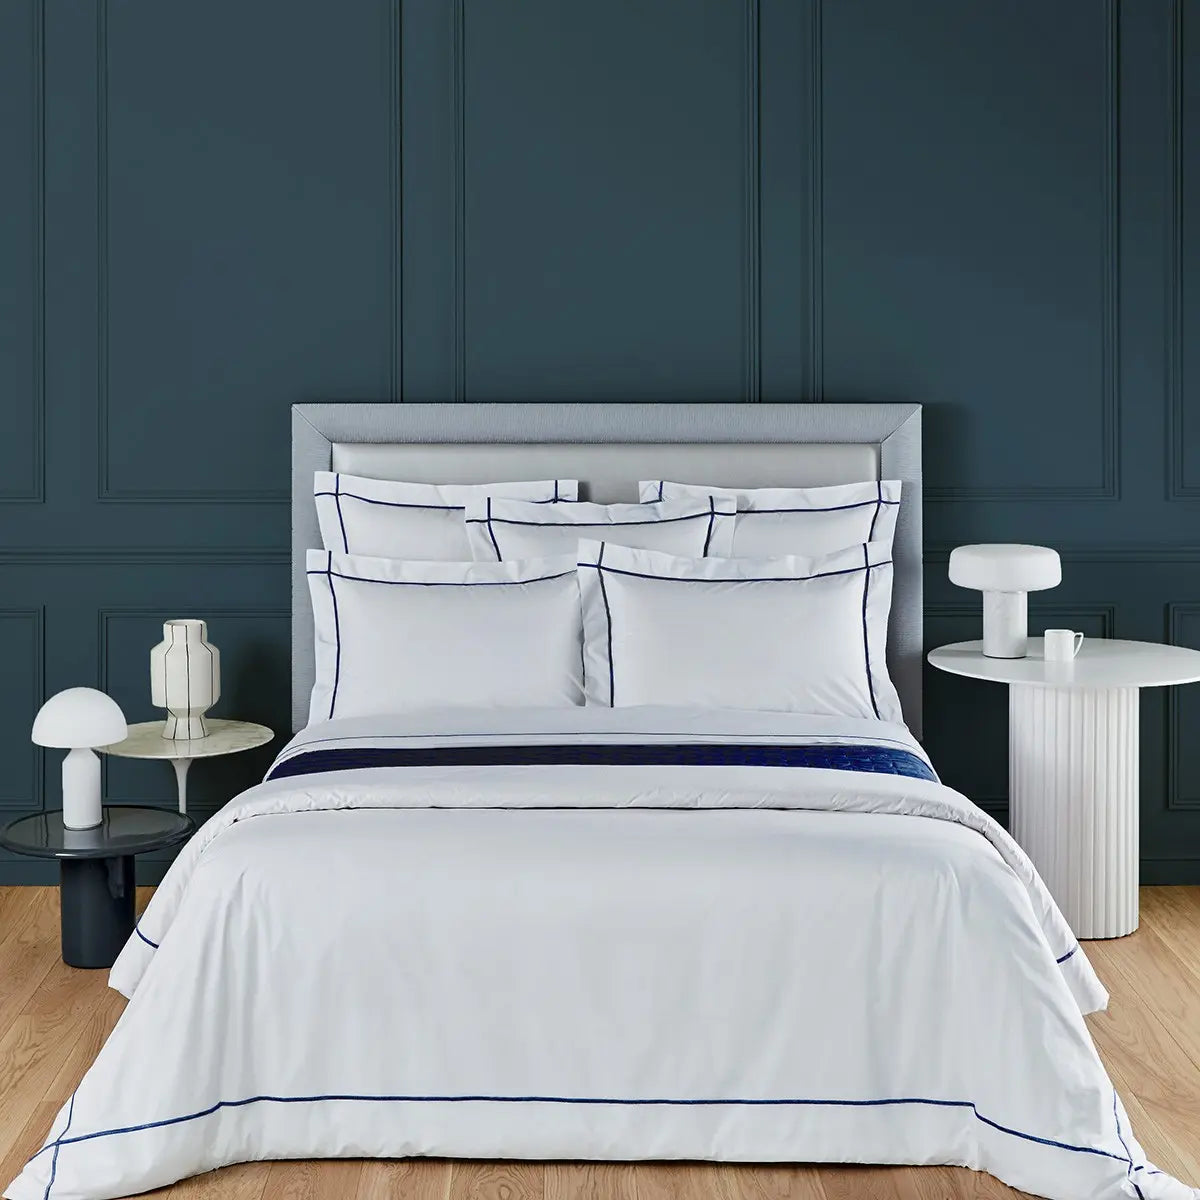 Yves Delorme Athena Bedding Collection in a room